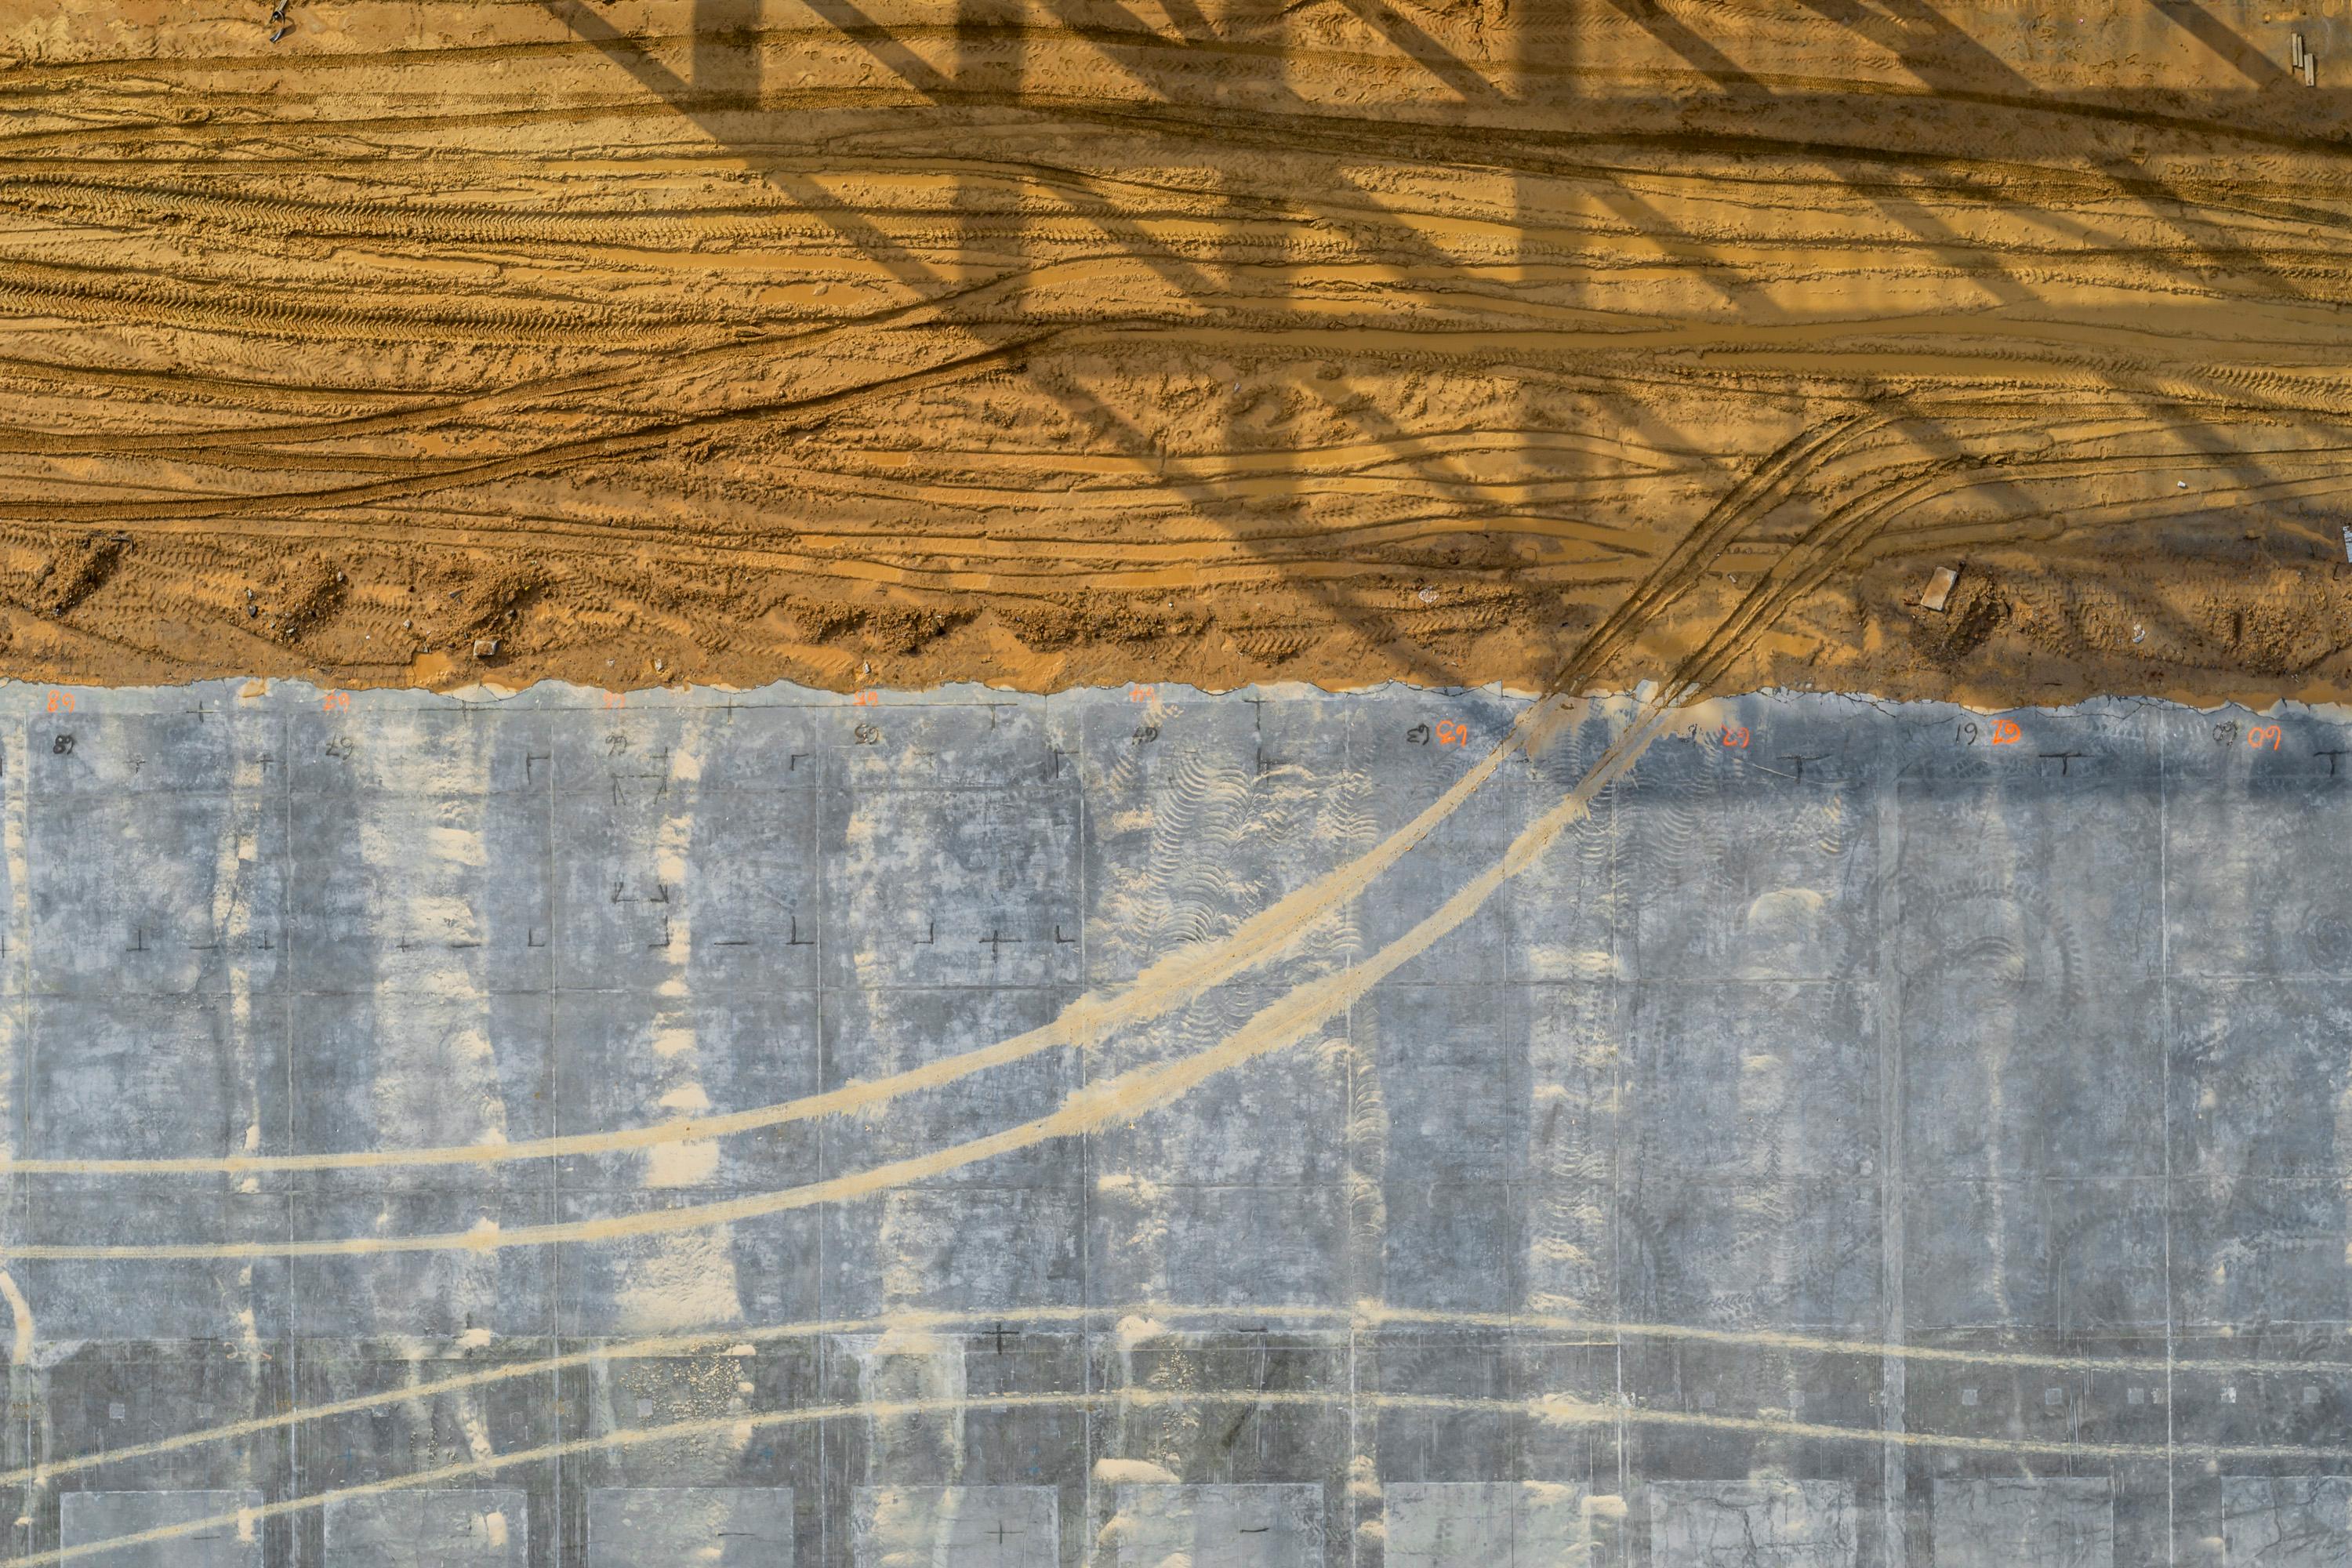 Peter Essick Abstract Photograph - "Construction Site, Stone Mountain, GA #12" Landscape Photography - Ansel Adams